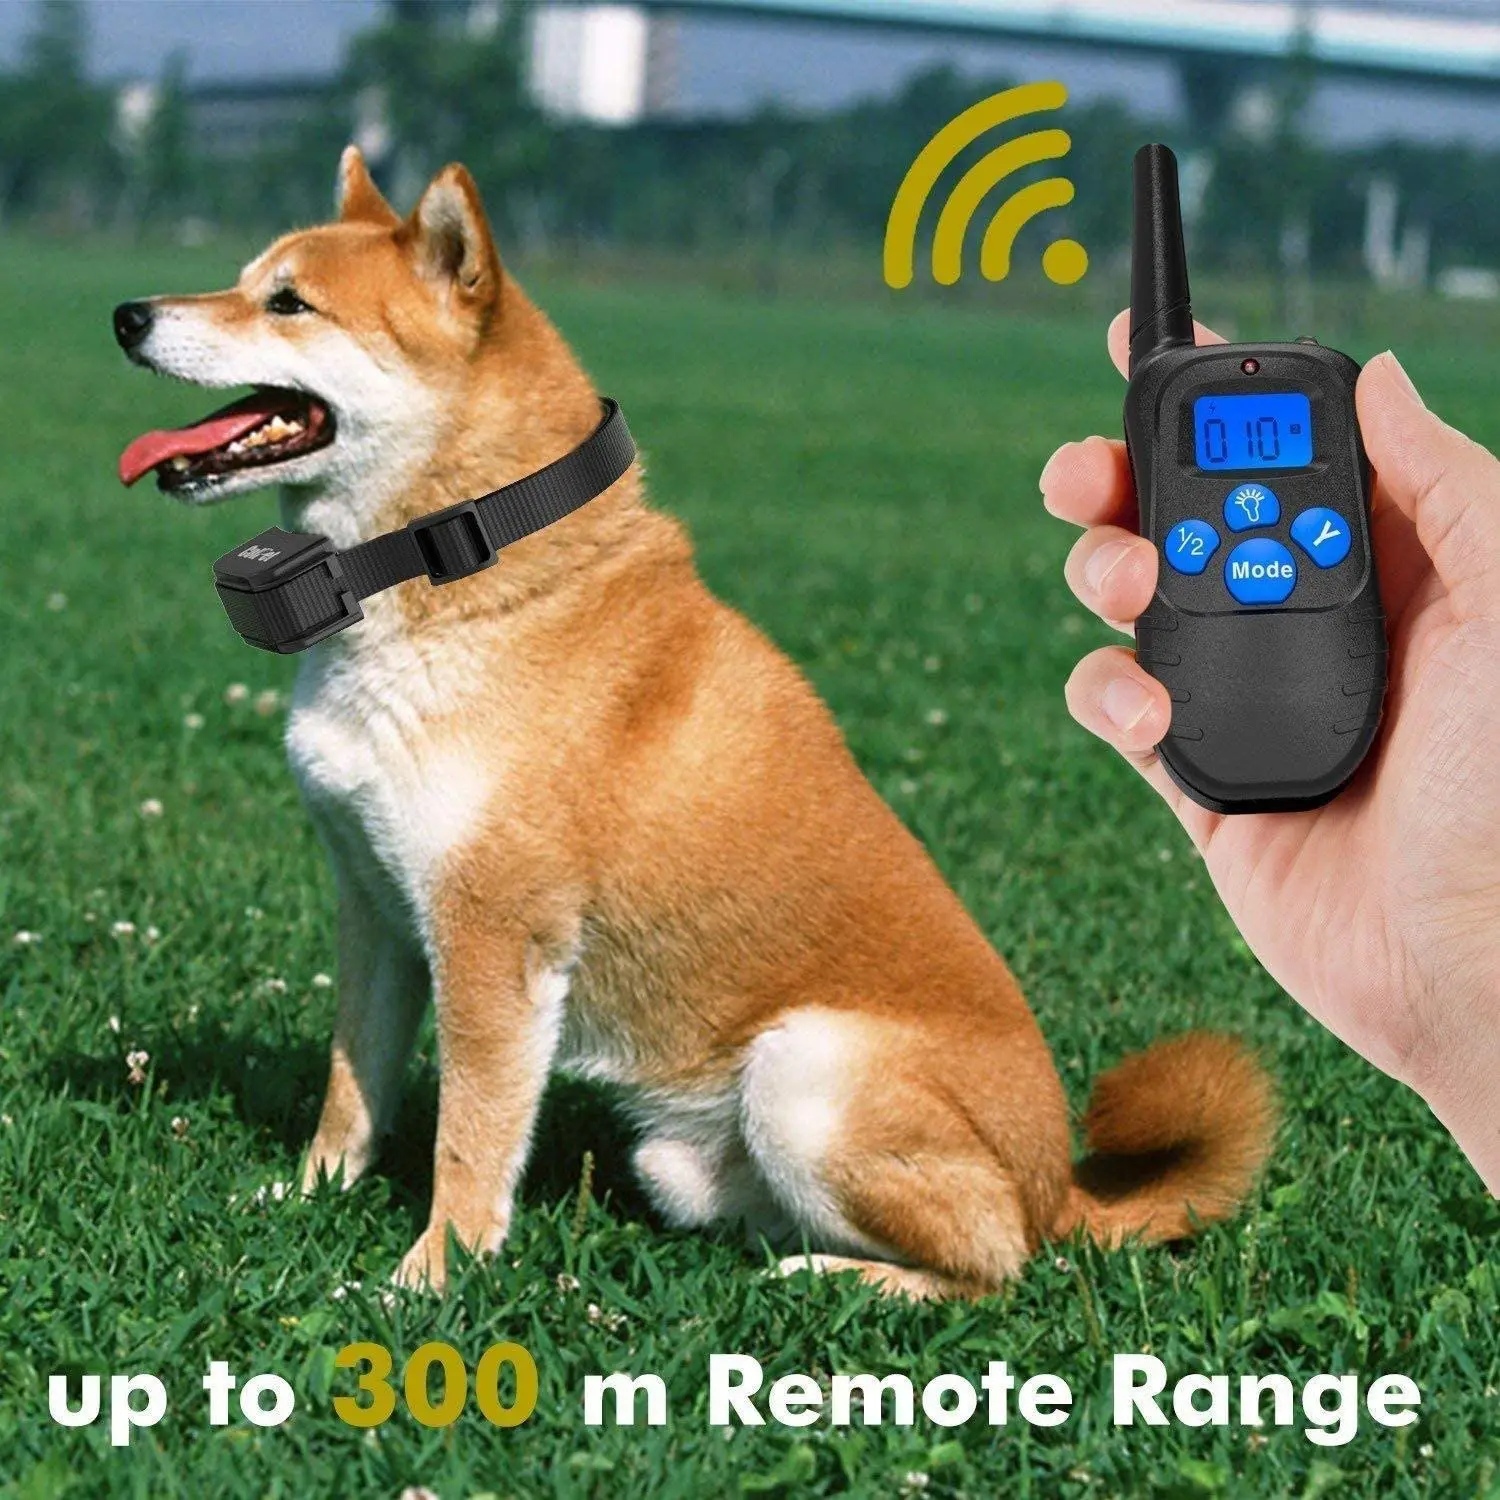 

300M Remote Electric Dog Collar Shock Vibration Rechargeable Rainproof Dog Training Collar With LCD Display